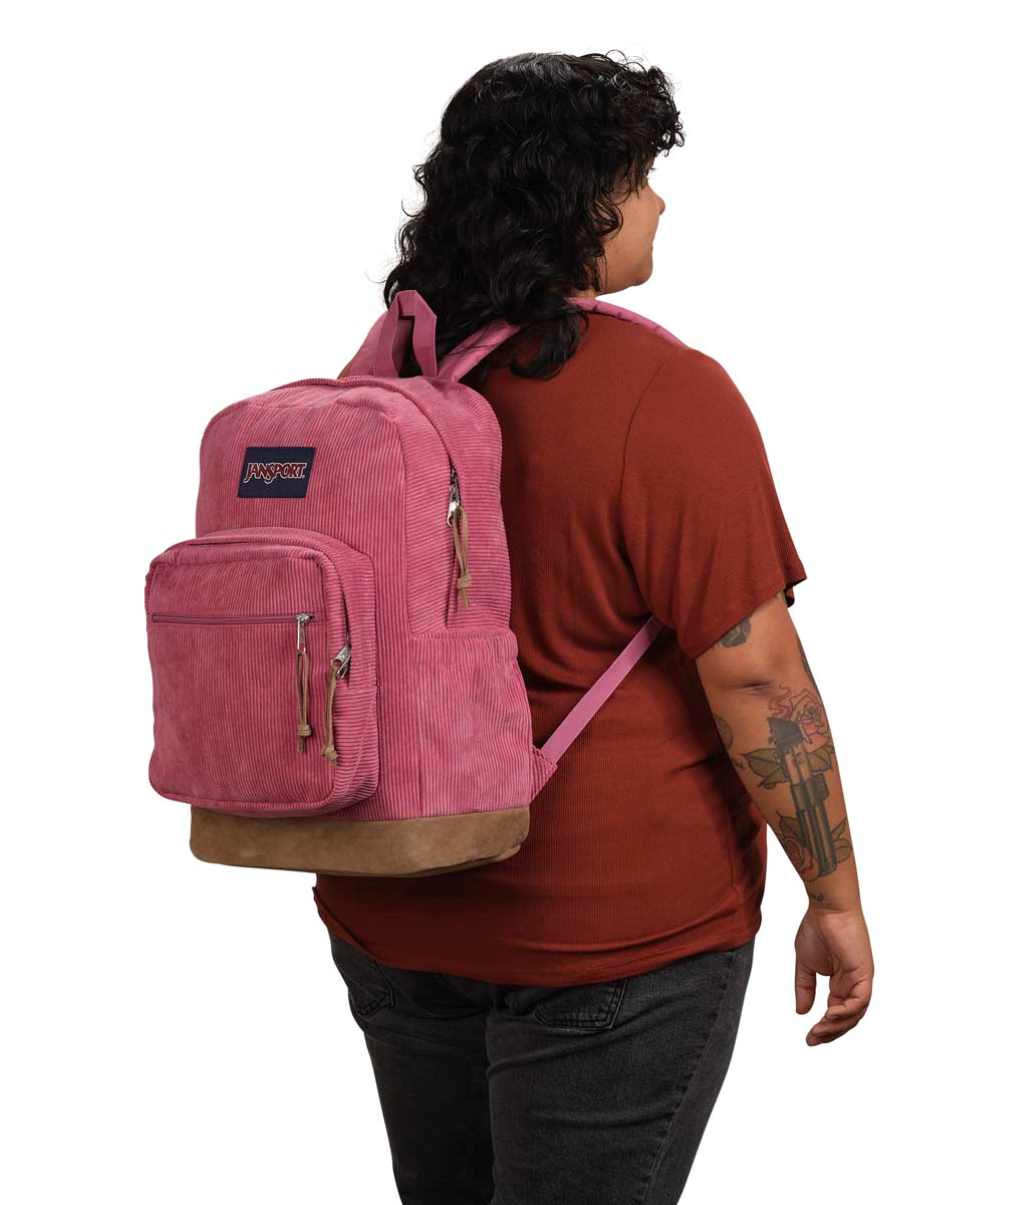 jansport_right-pack-expressions_38-23-2024__picture-2303